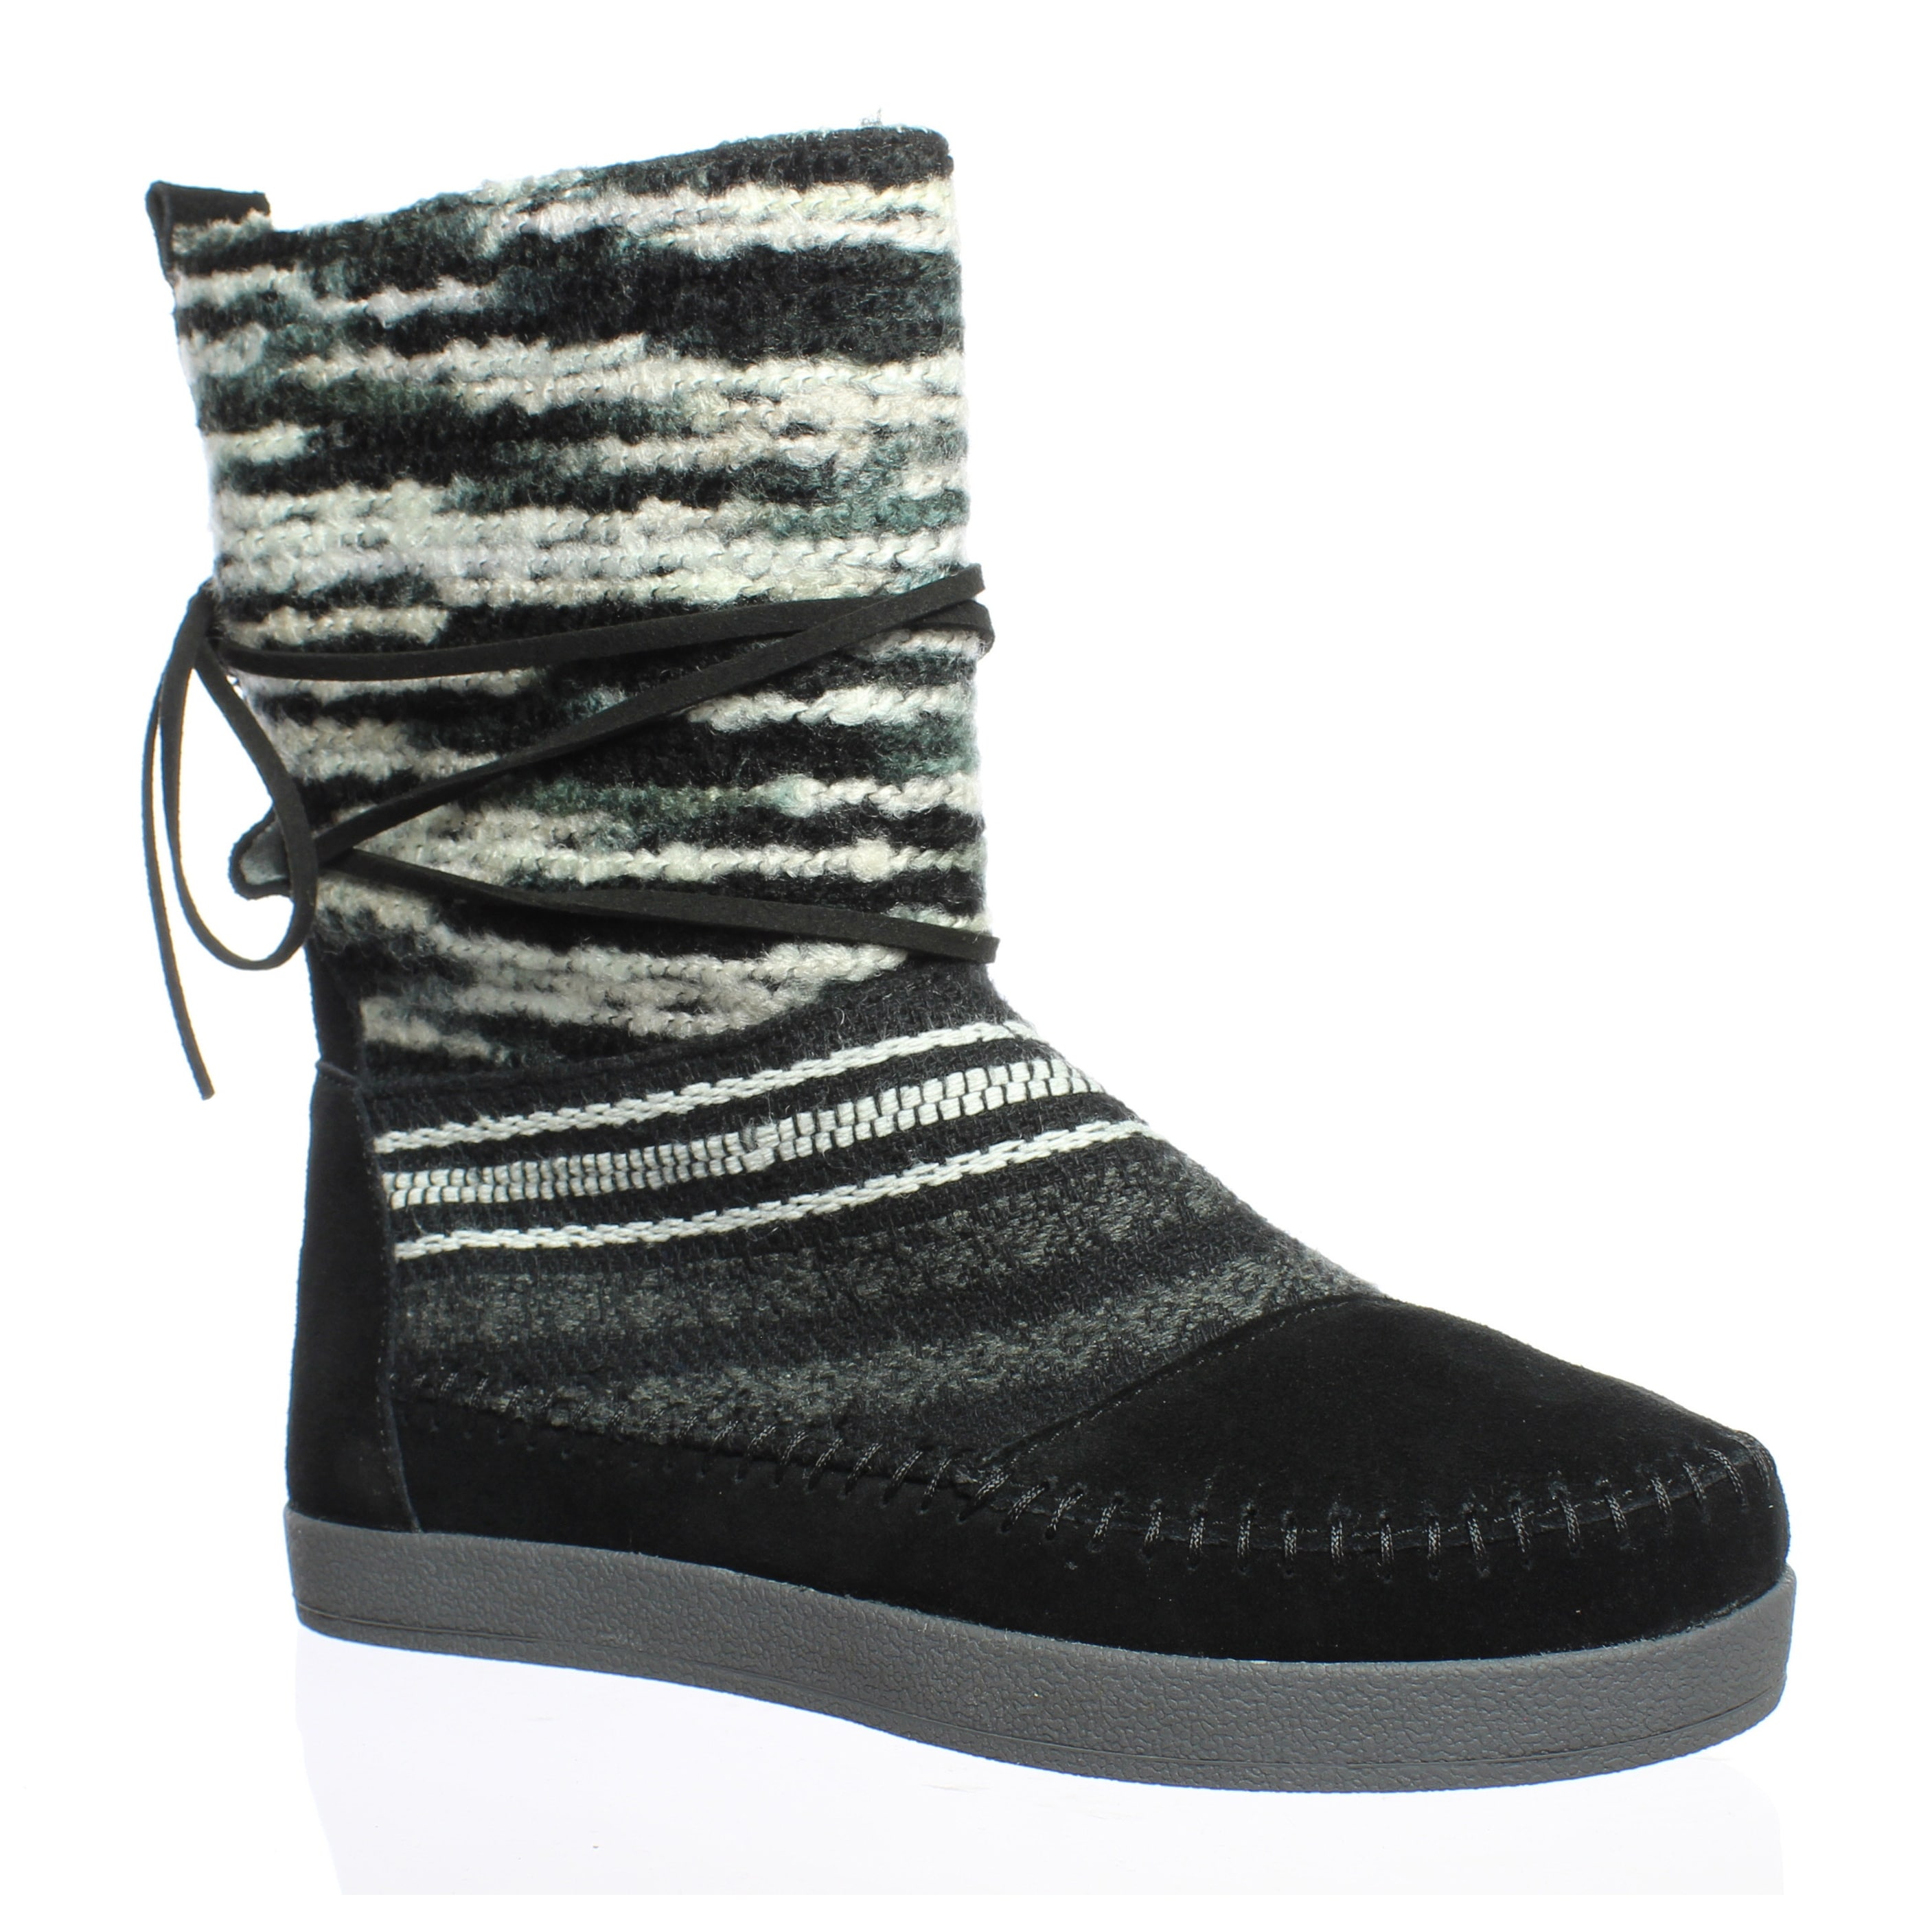 TOMS Womens Nepal Black Ankle Boots 